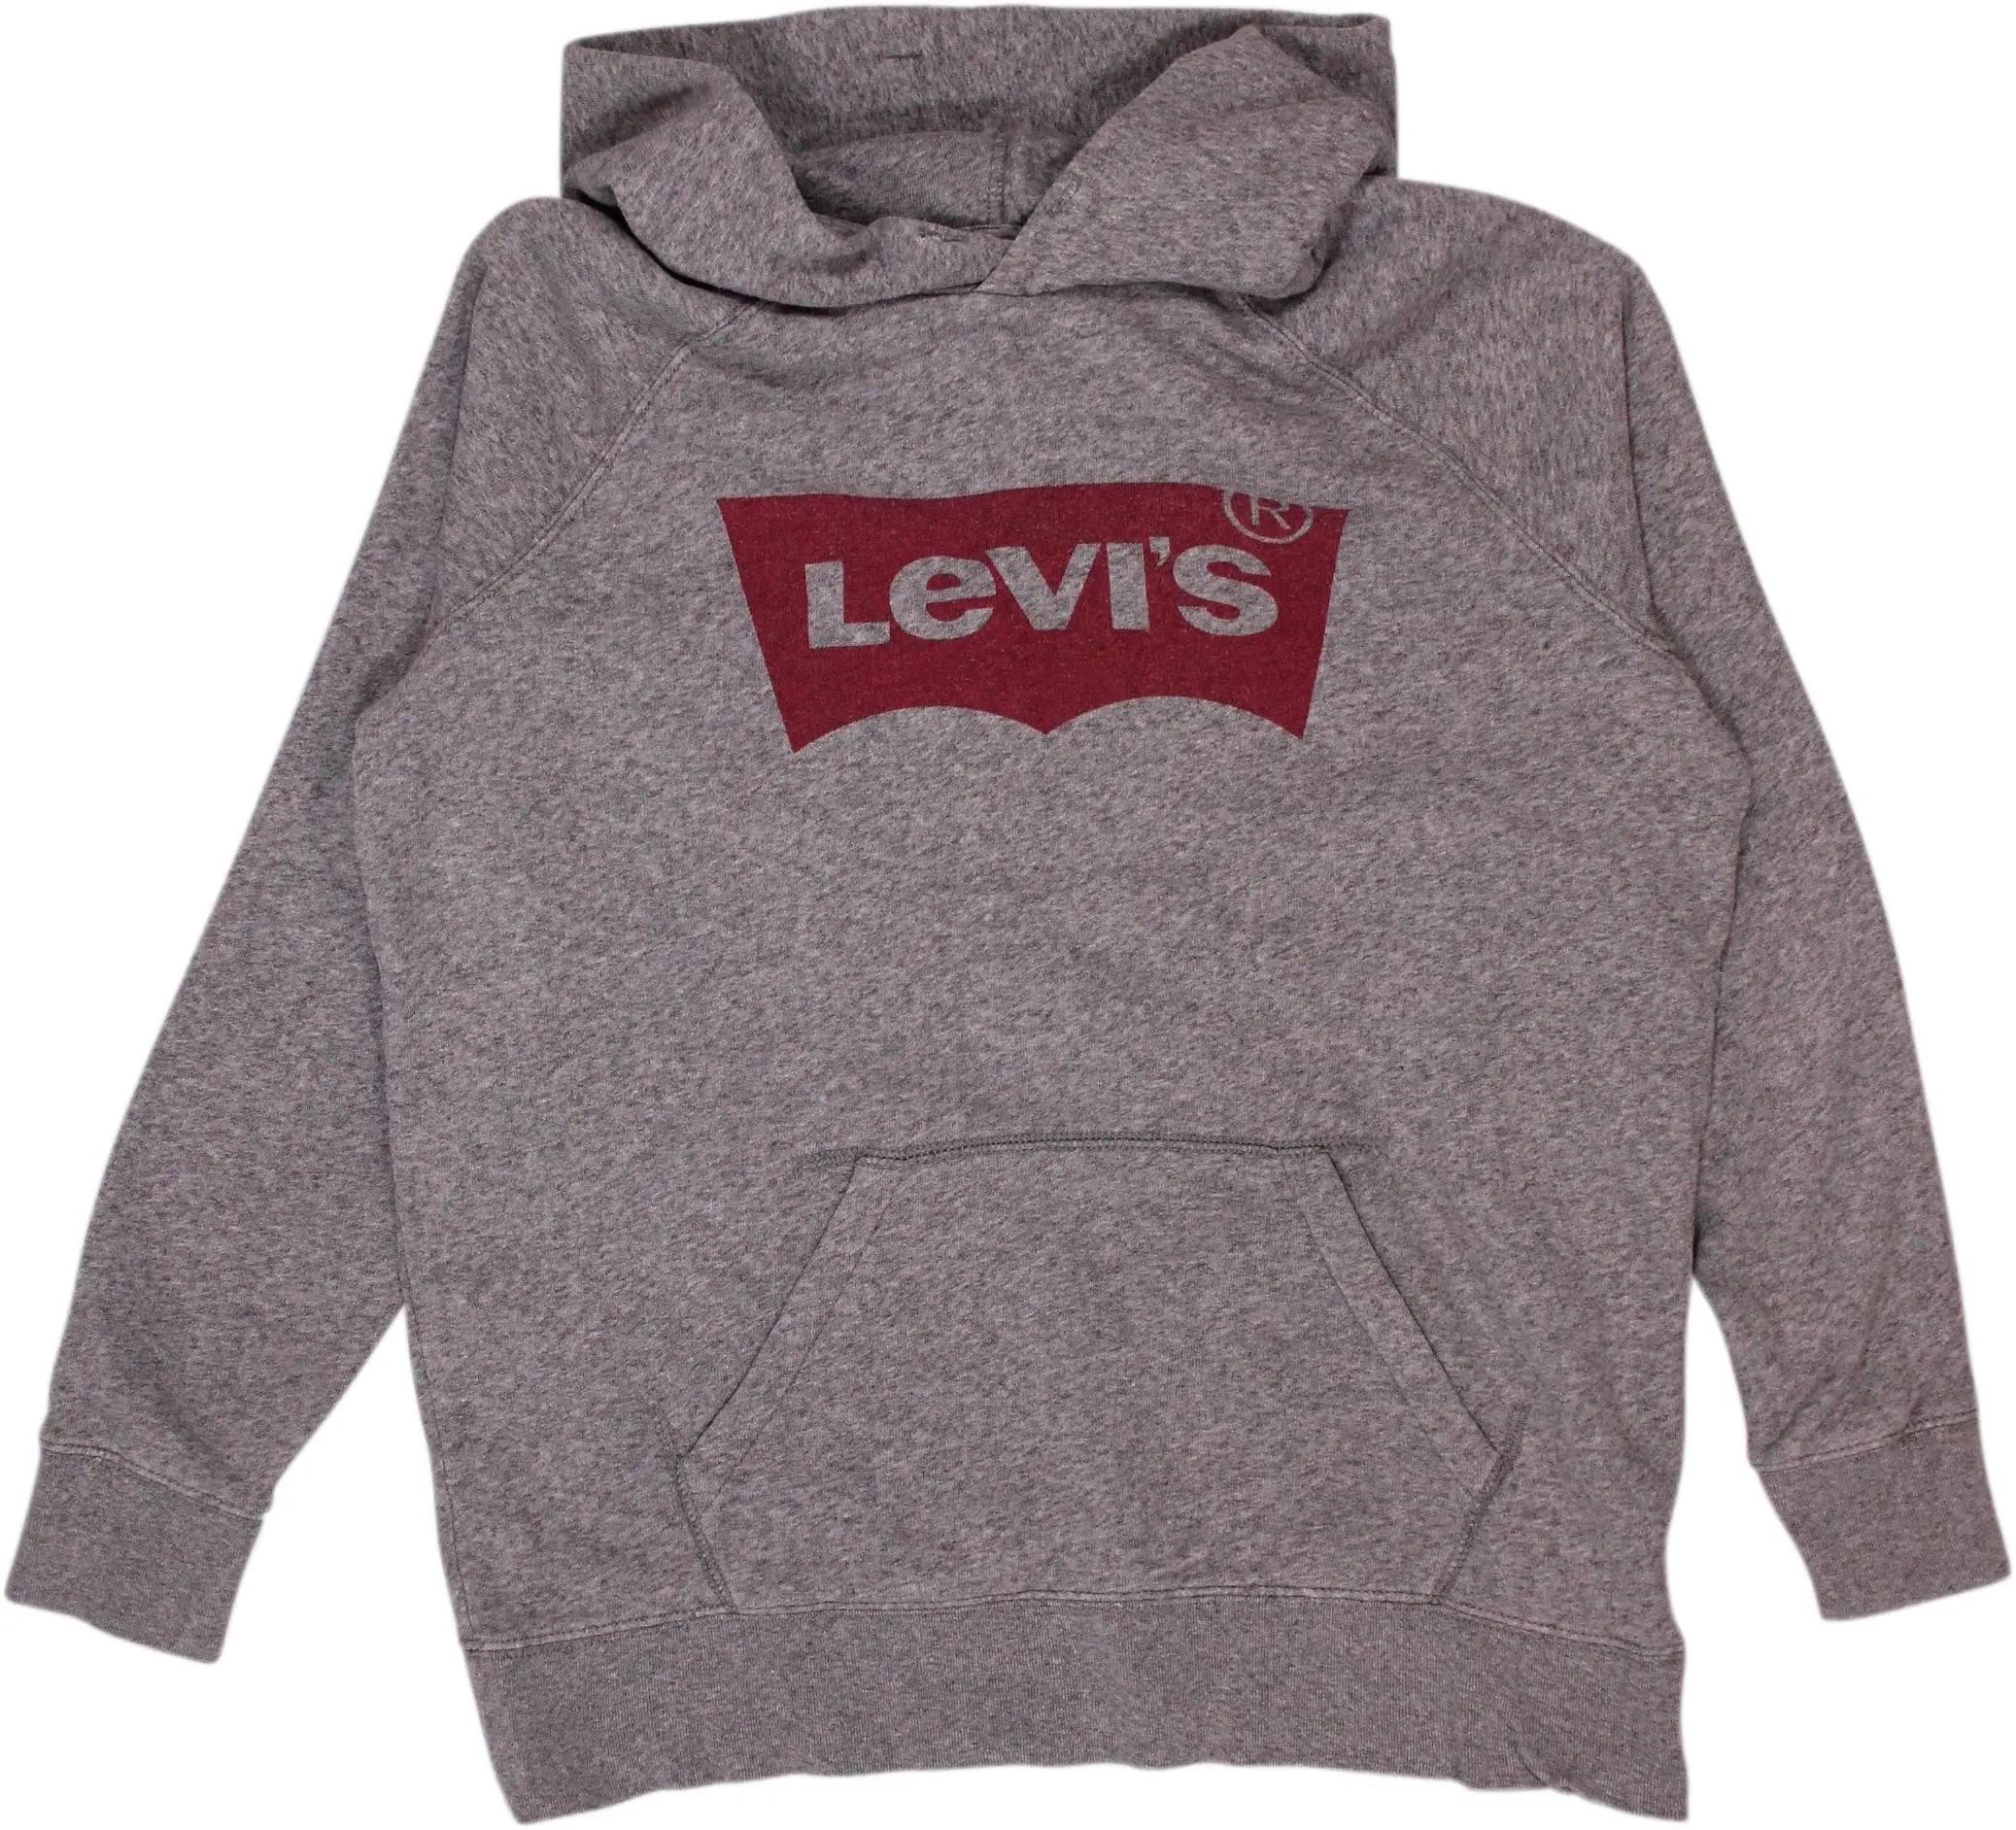 Levi's - Grey Hoodie by Levi's- ThriftTale.com - Vintage and second handclothing